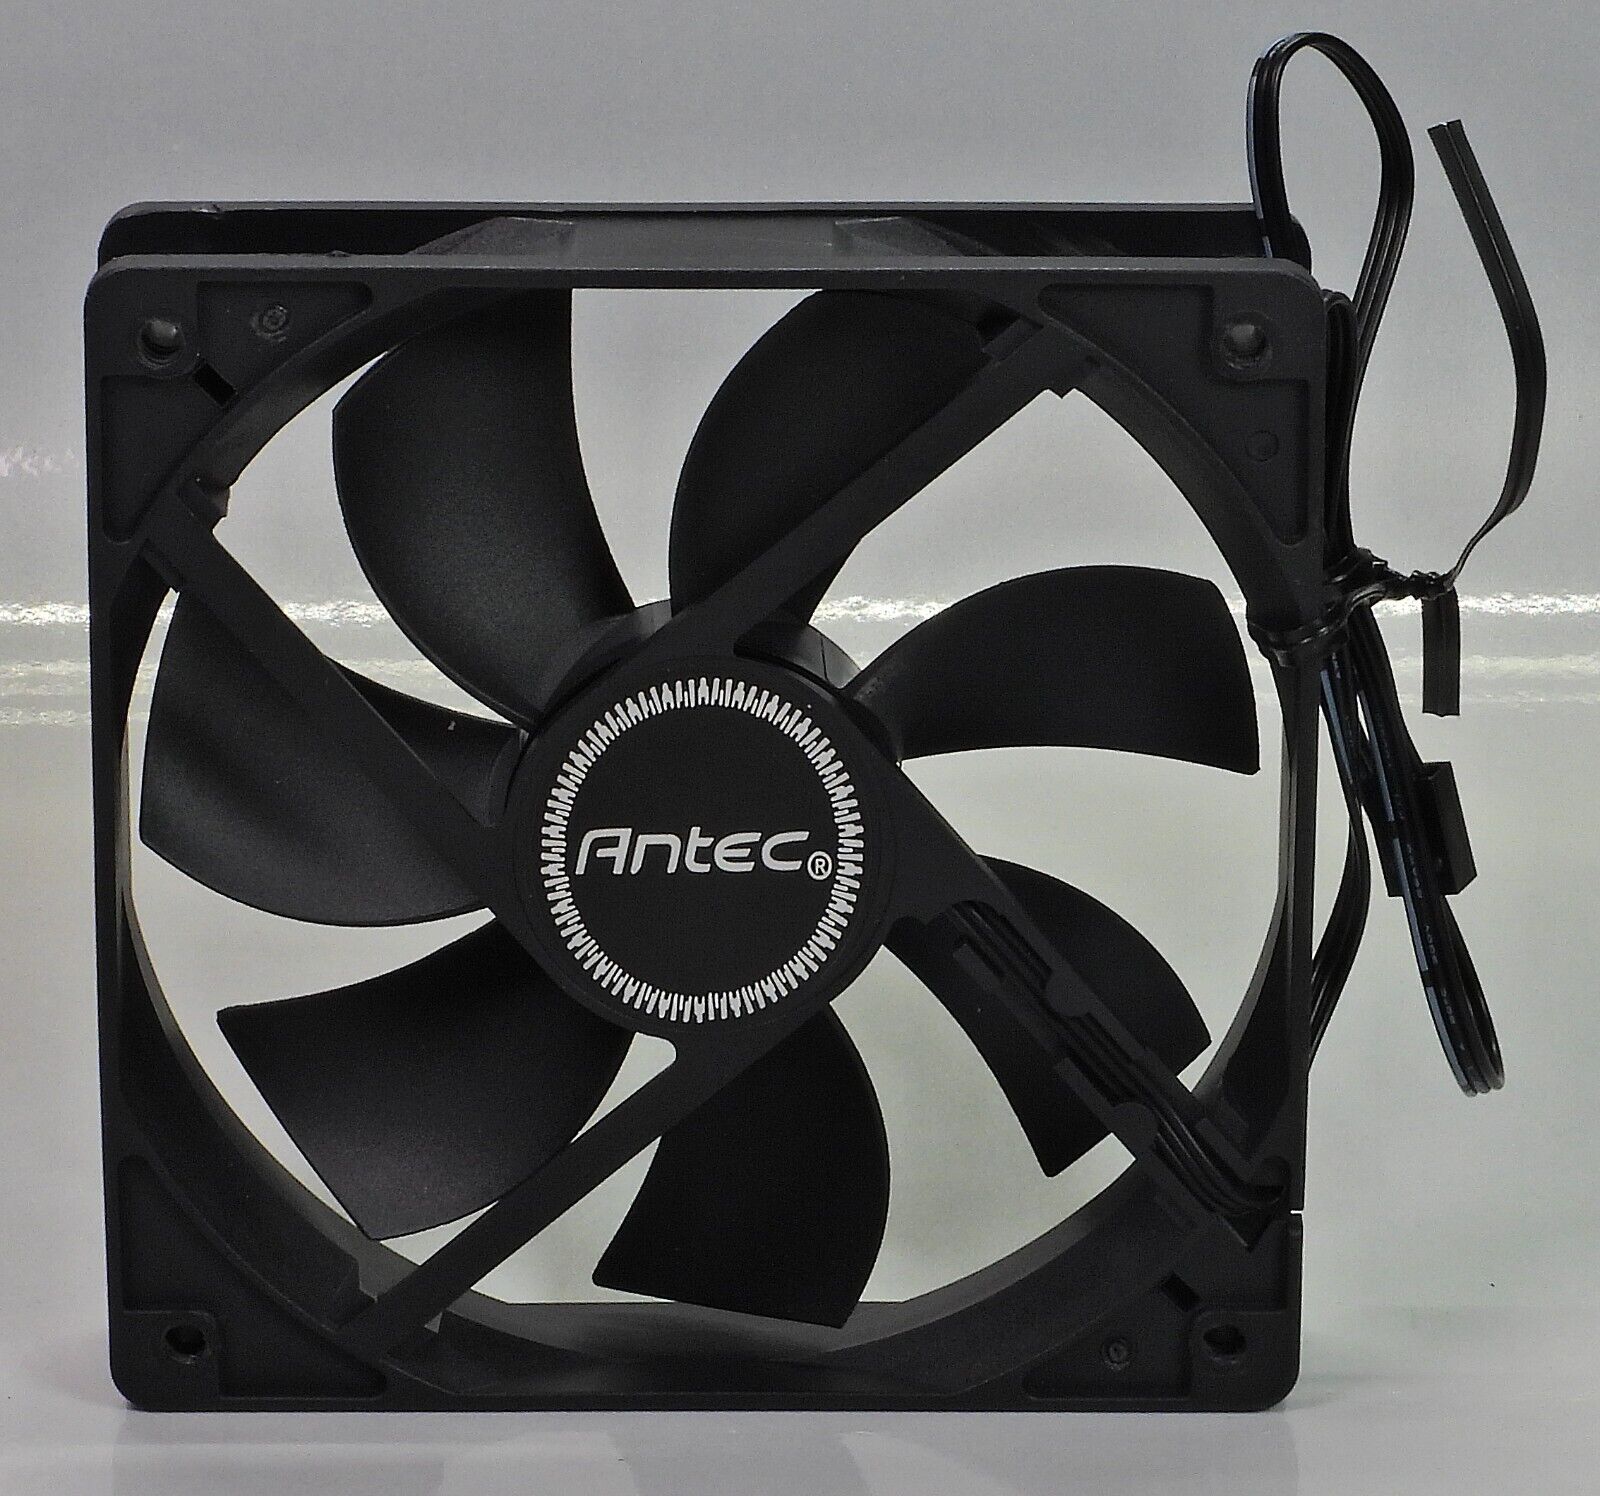 Case Fans - Various Sizes and Manufacturers